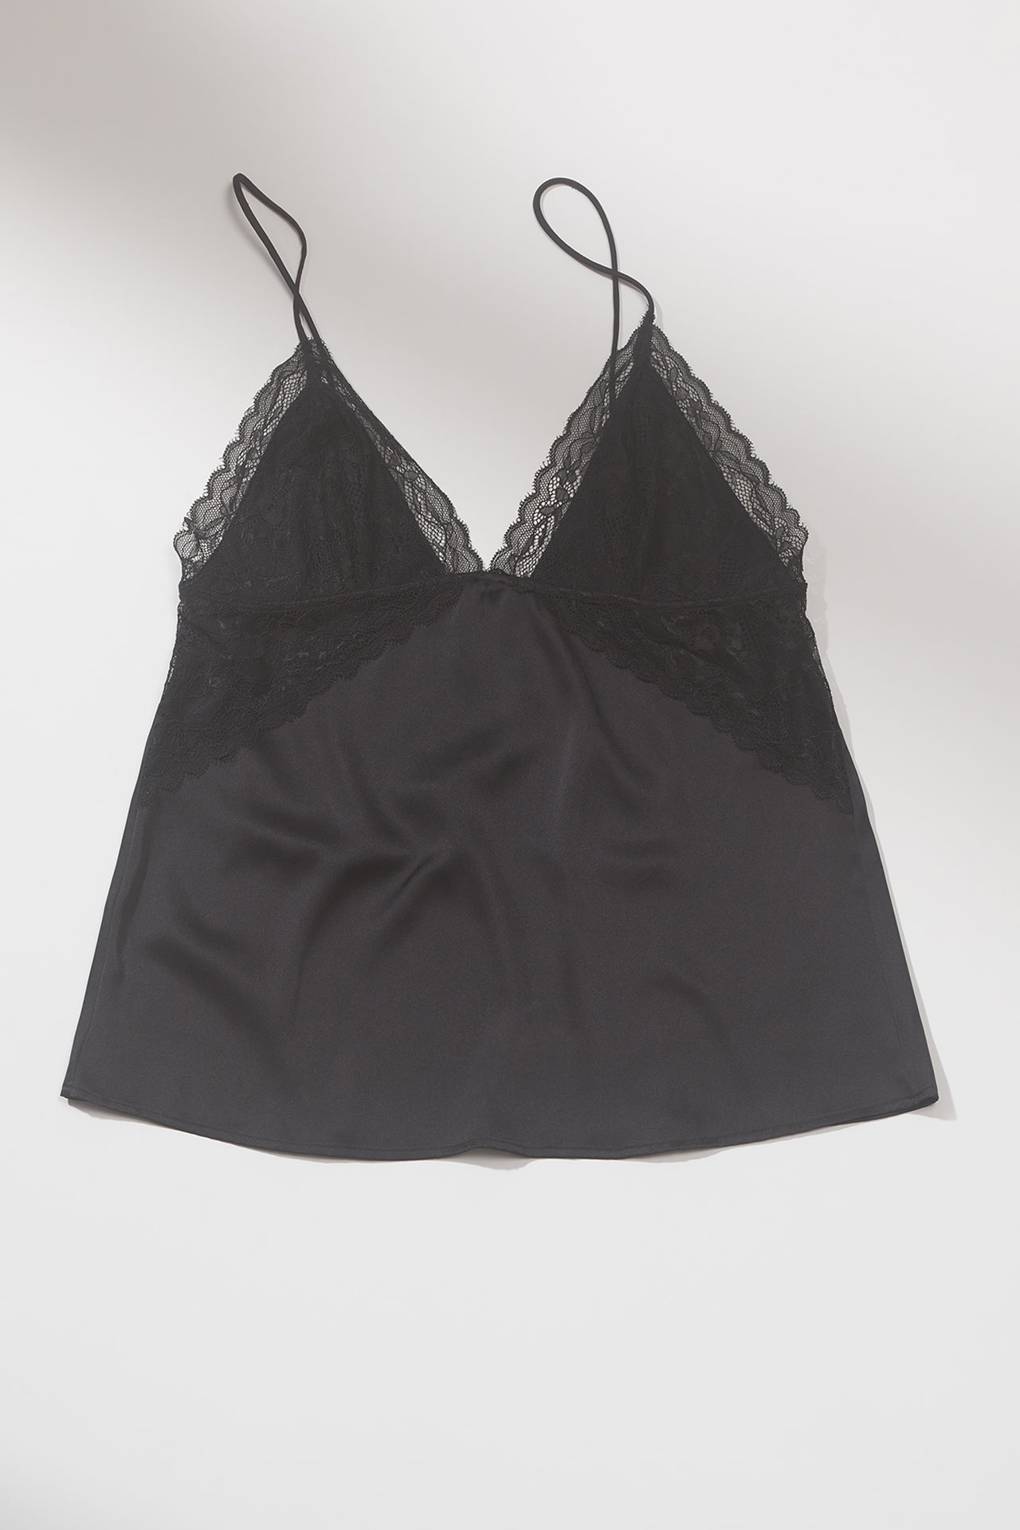 Zara Launches Beautiful Debut Lingerie Collection | Glamour UK